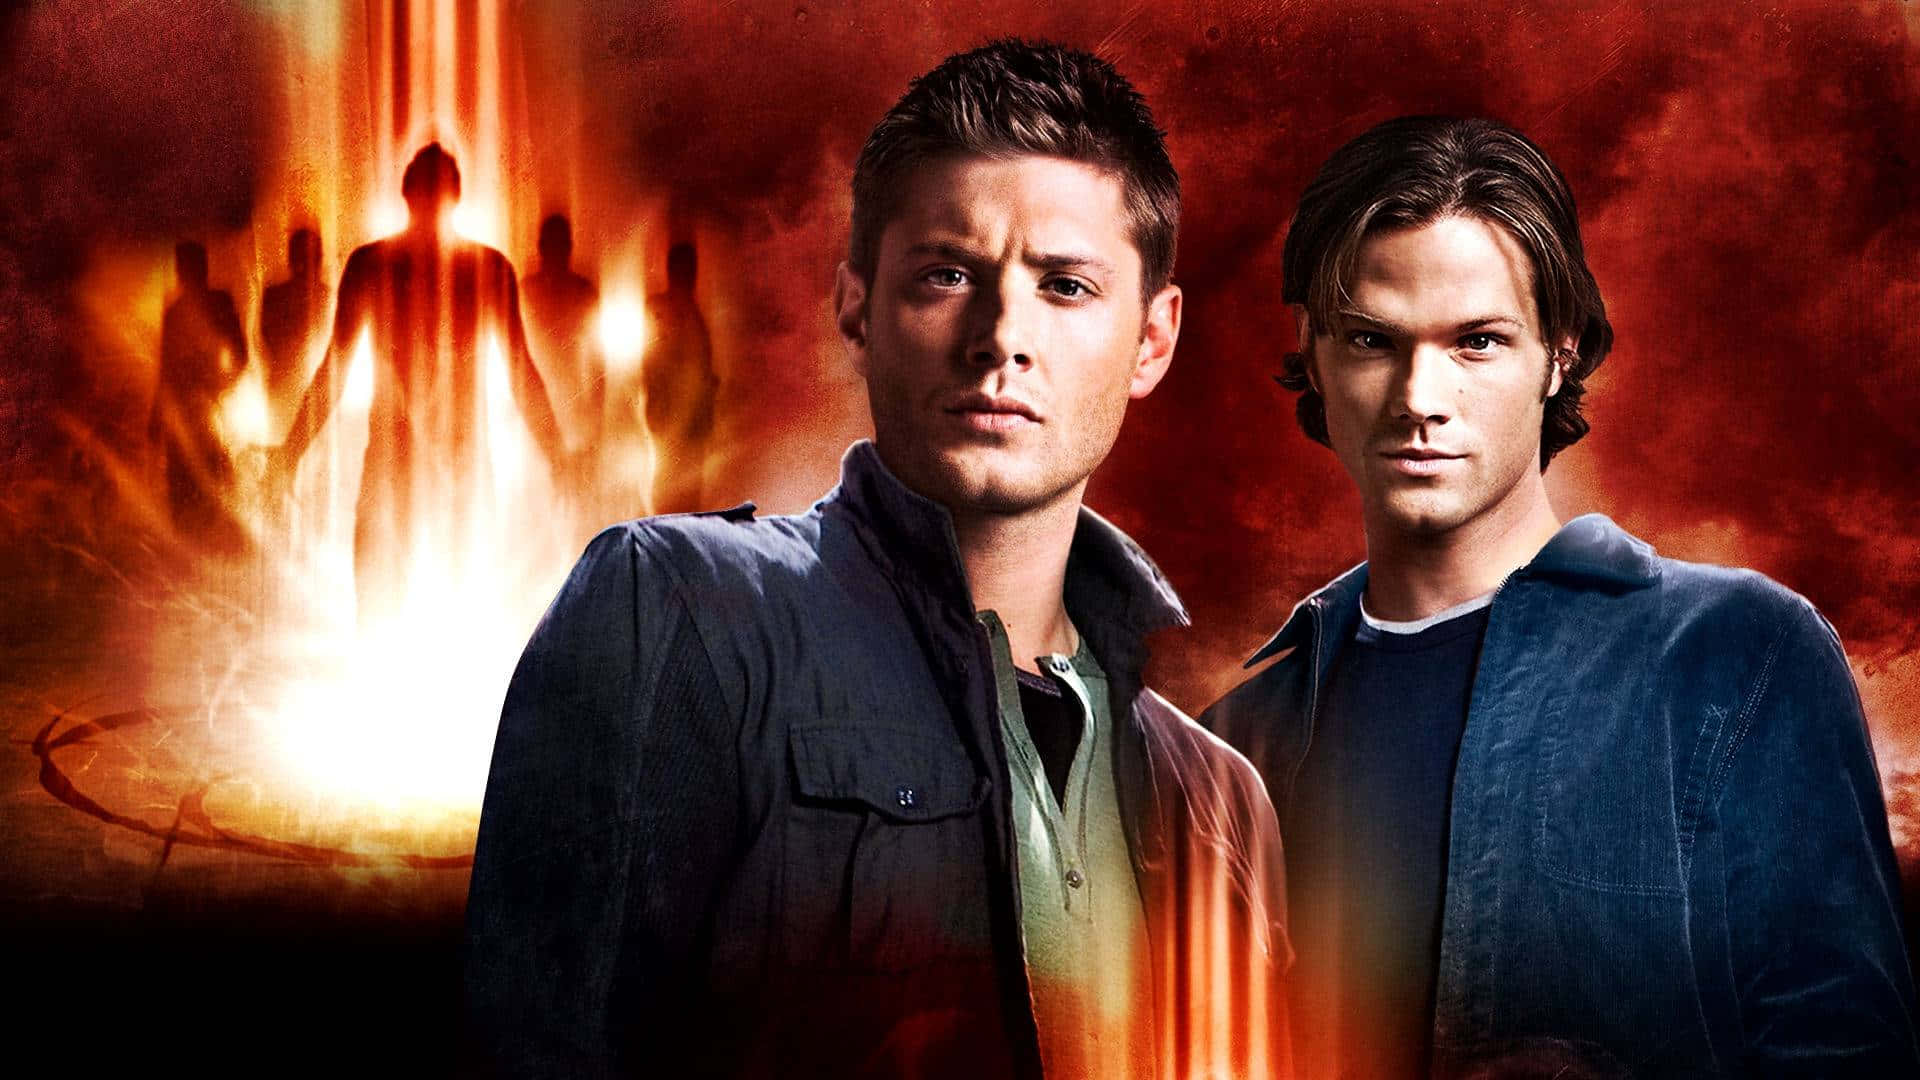 "Journey with Dean, Sam, and Castiel to Hunt Down the Unknown"